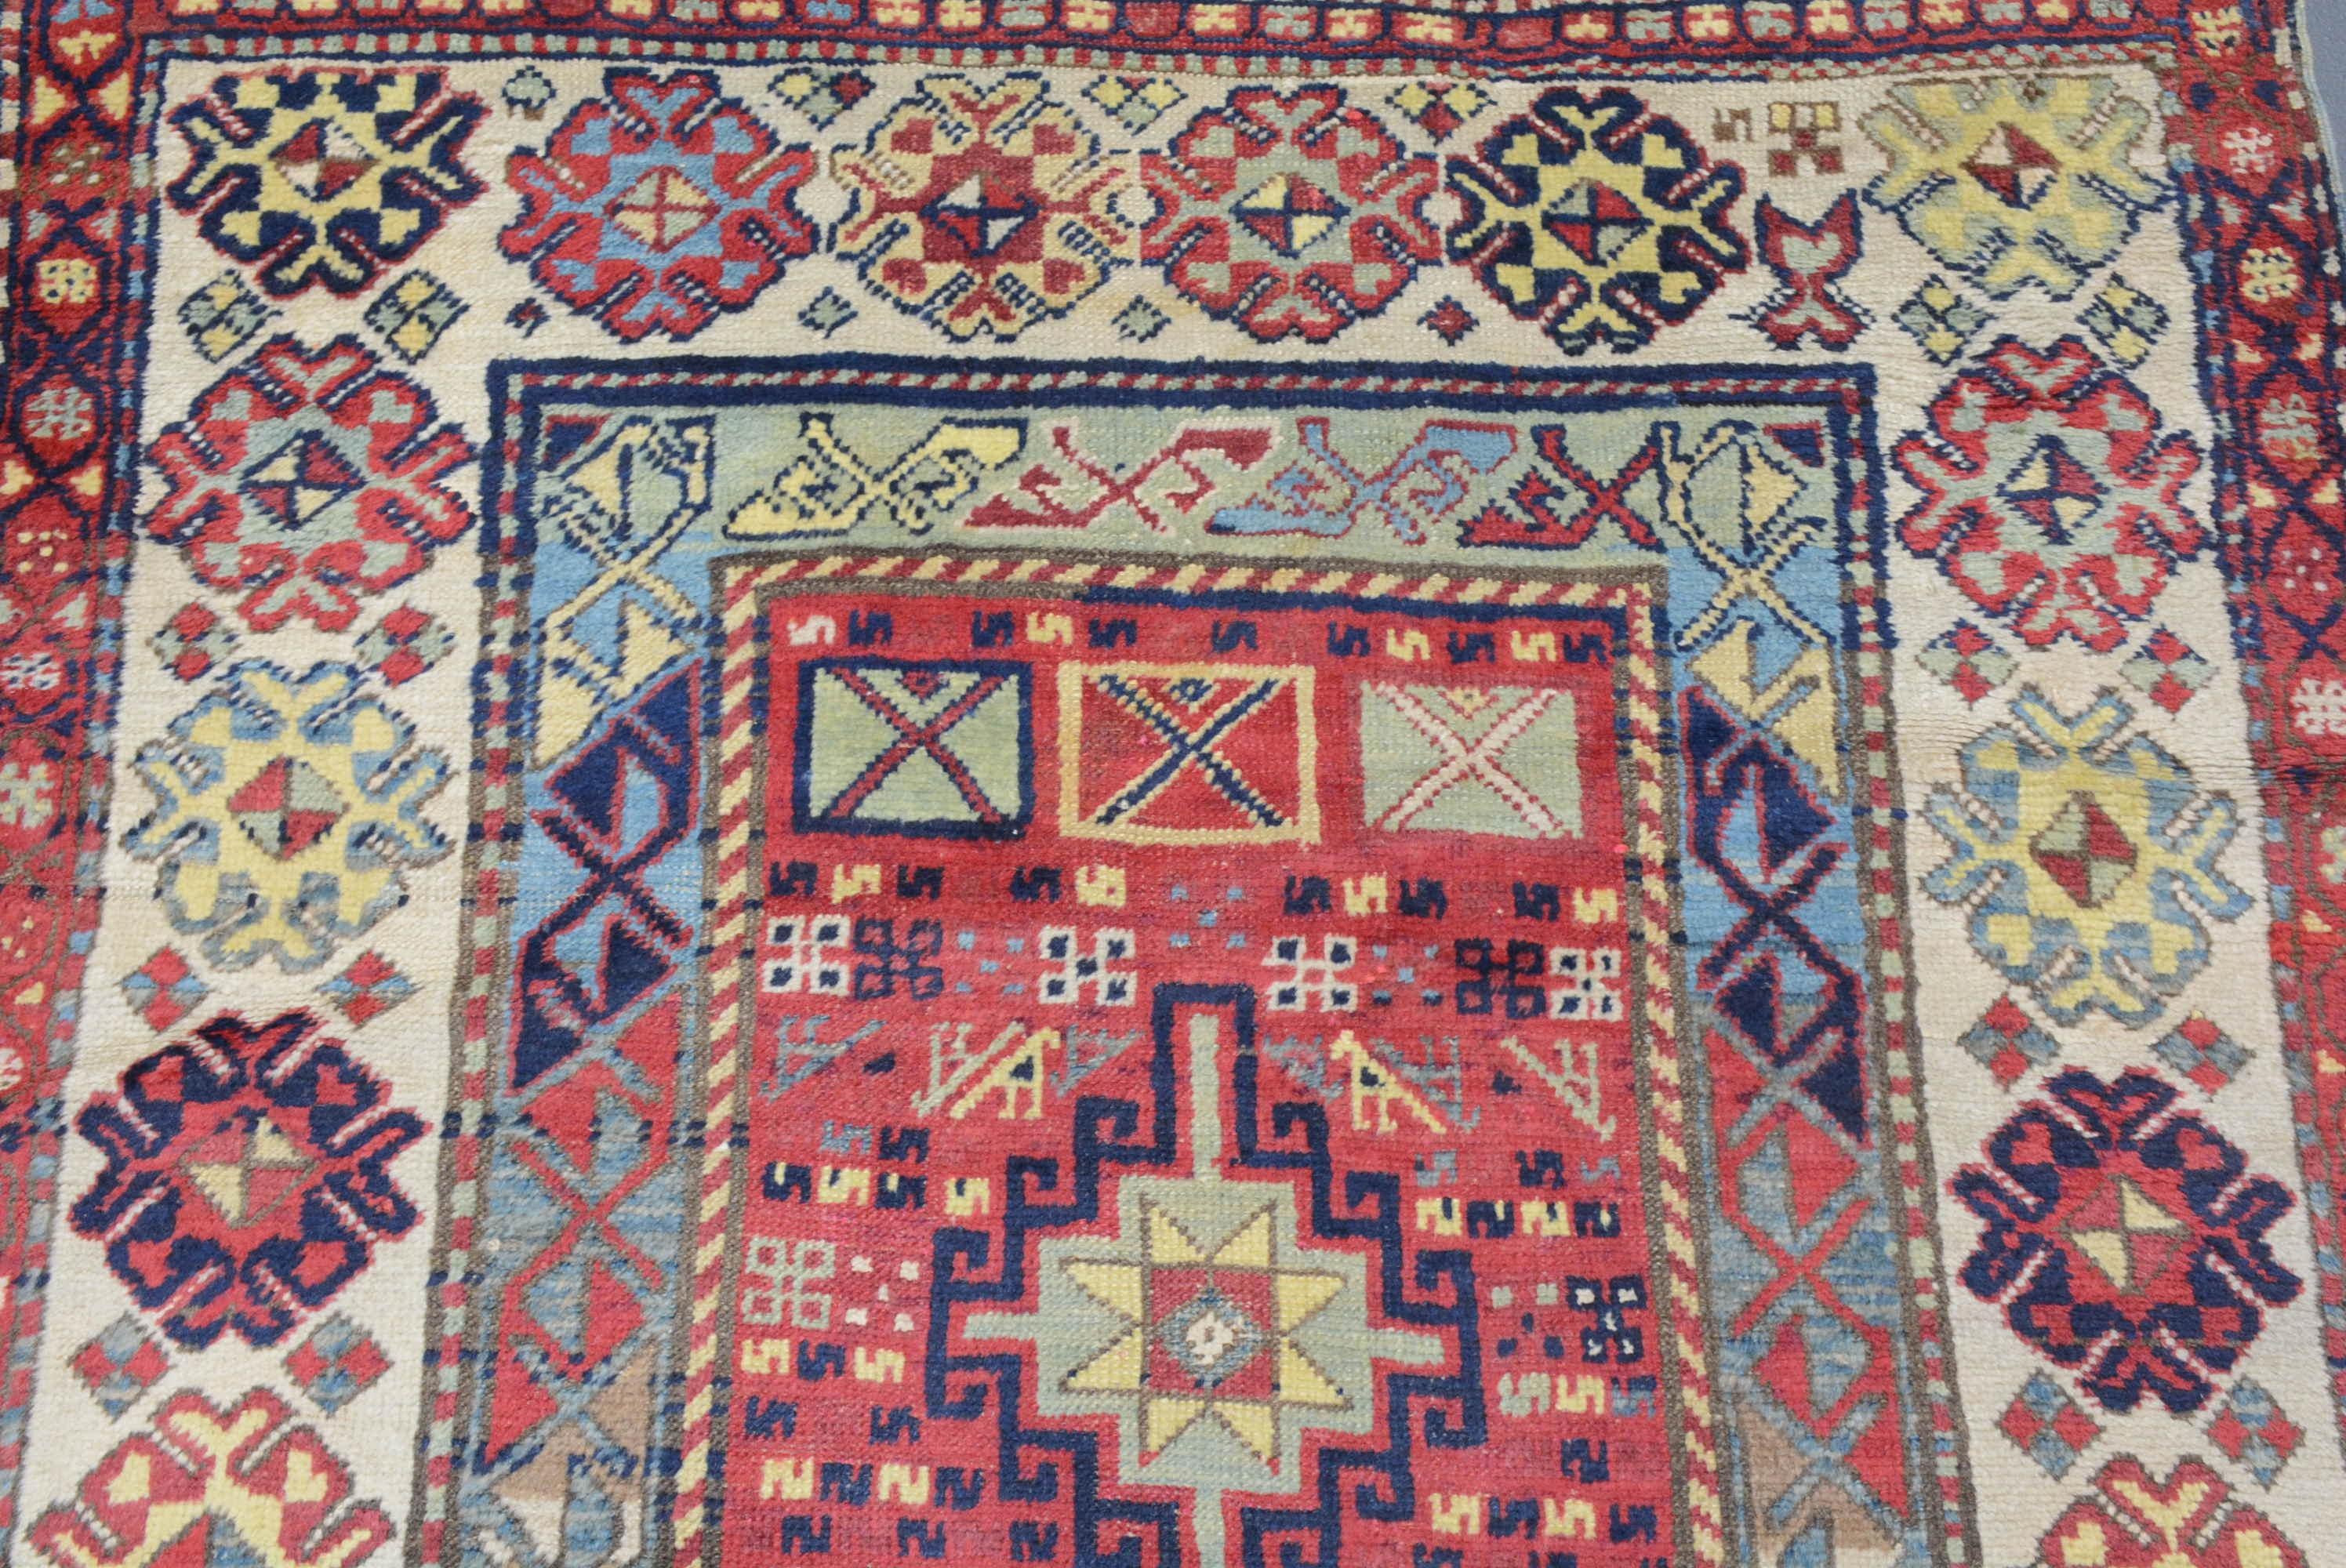 Gendje rugs are woven in the southwest Caucasus, surrounded by the weaving centers of Kazak, Karabagh, and Shirvan. A major railway line that ran from Tiflis to Baku passed through this area, and thus it became a major market or trading post for all